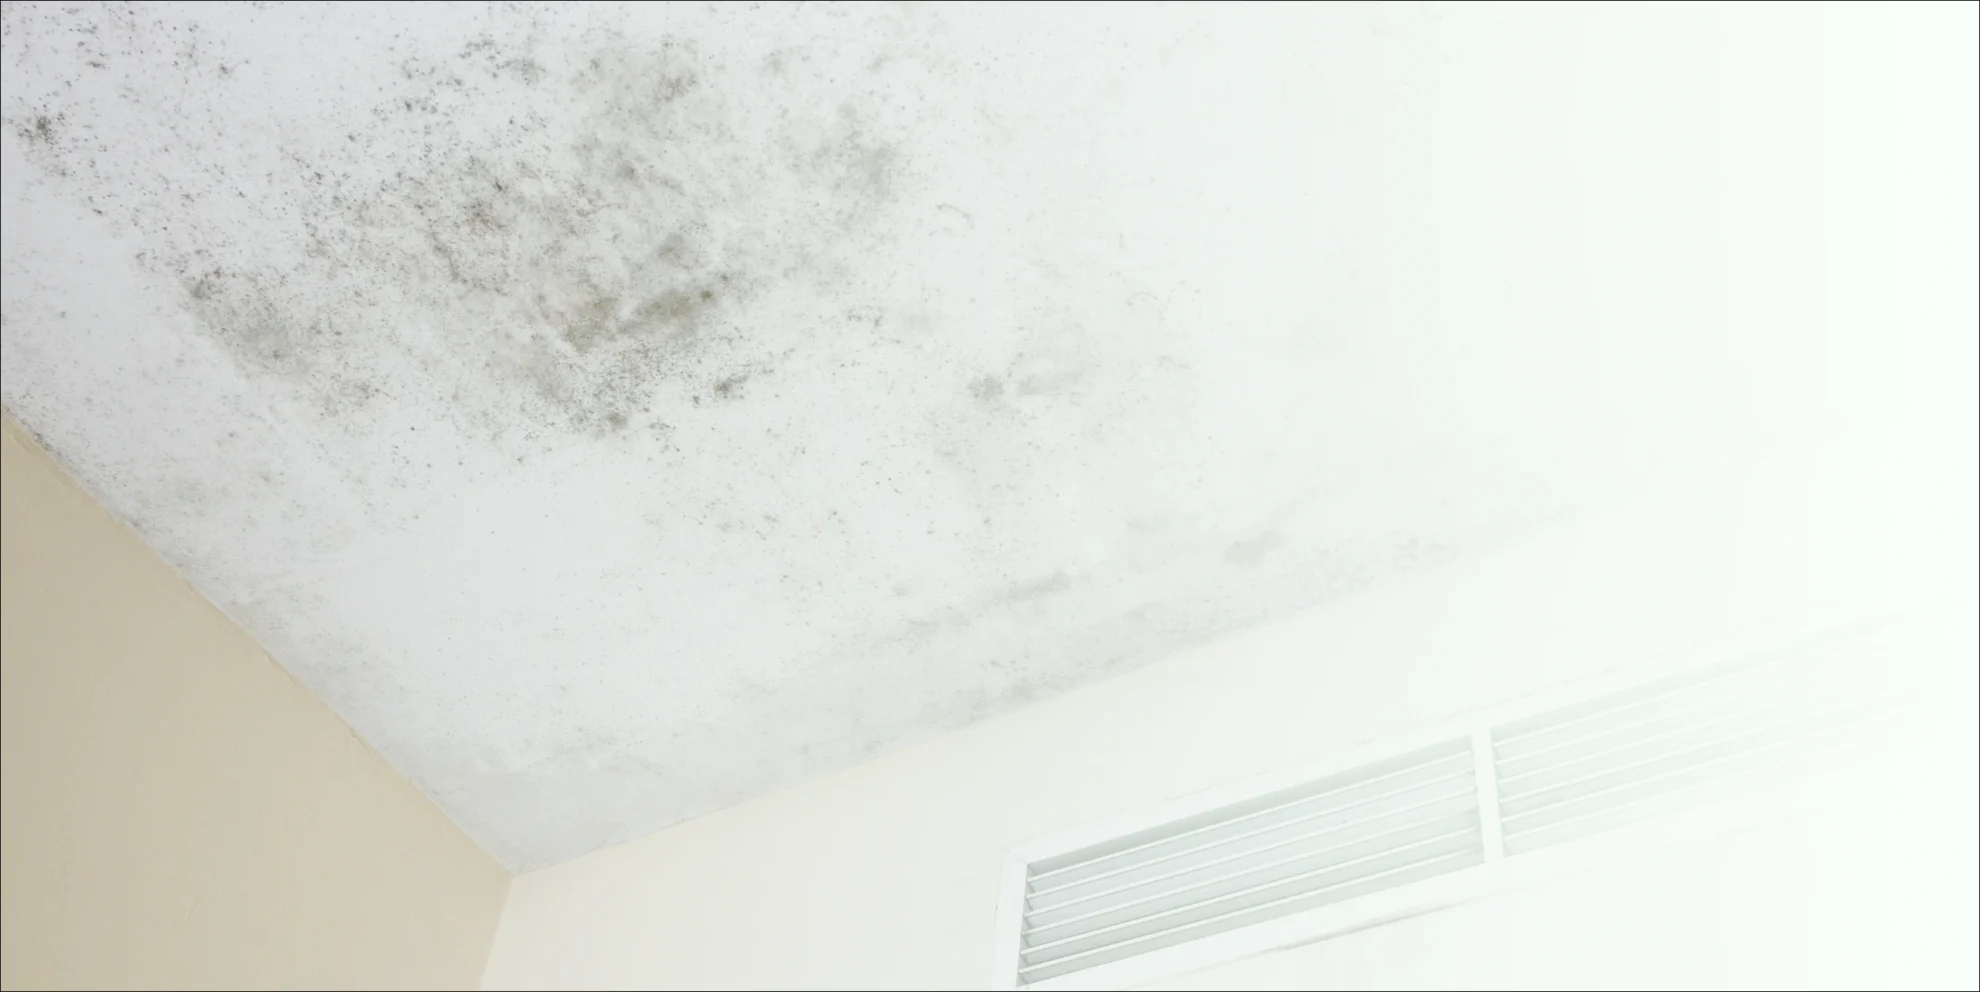 mold on the ceiling of a house